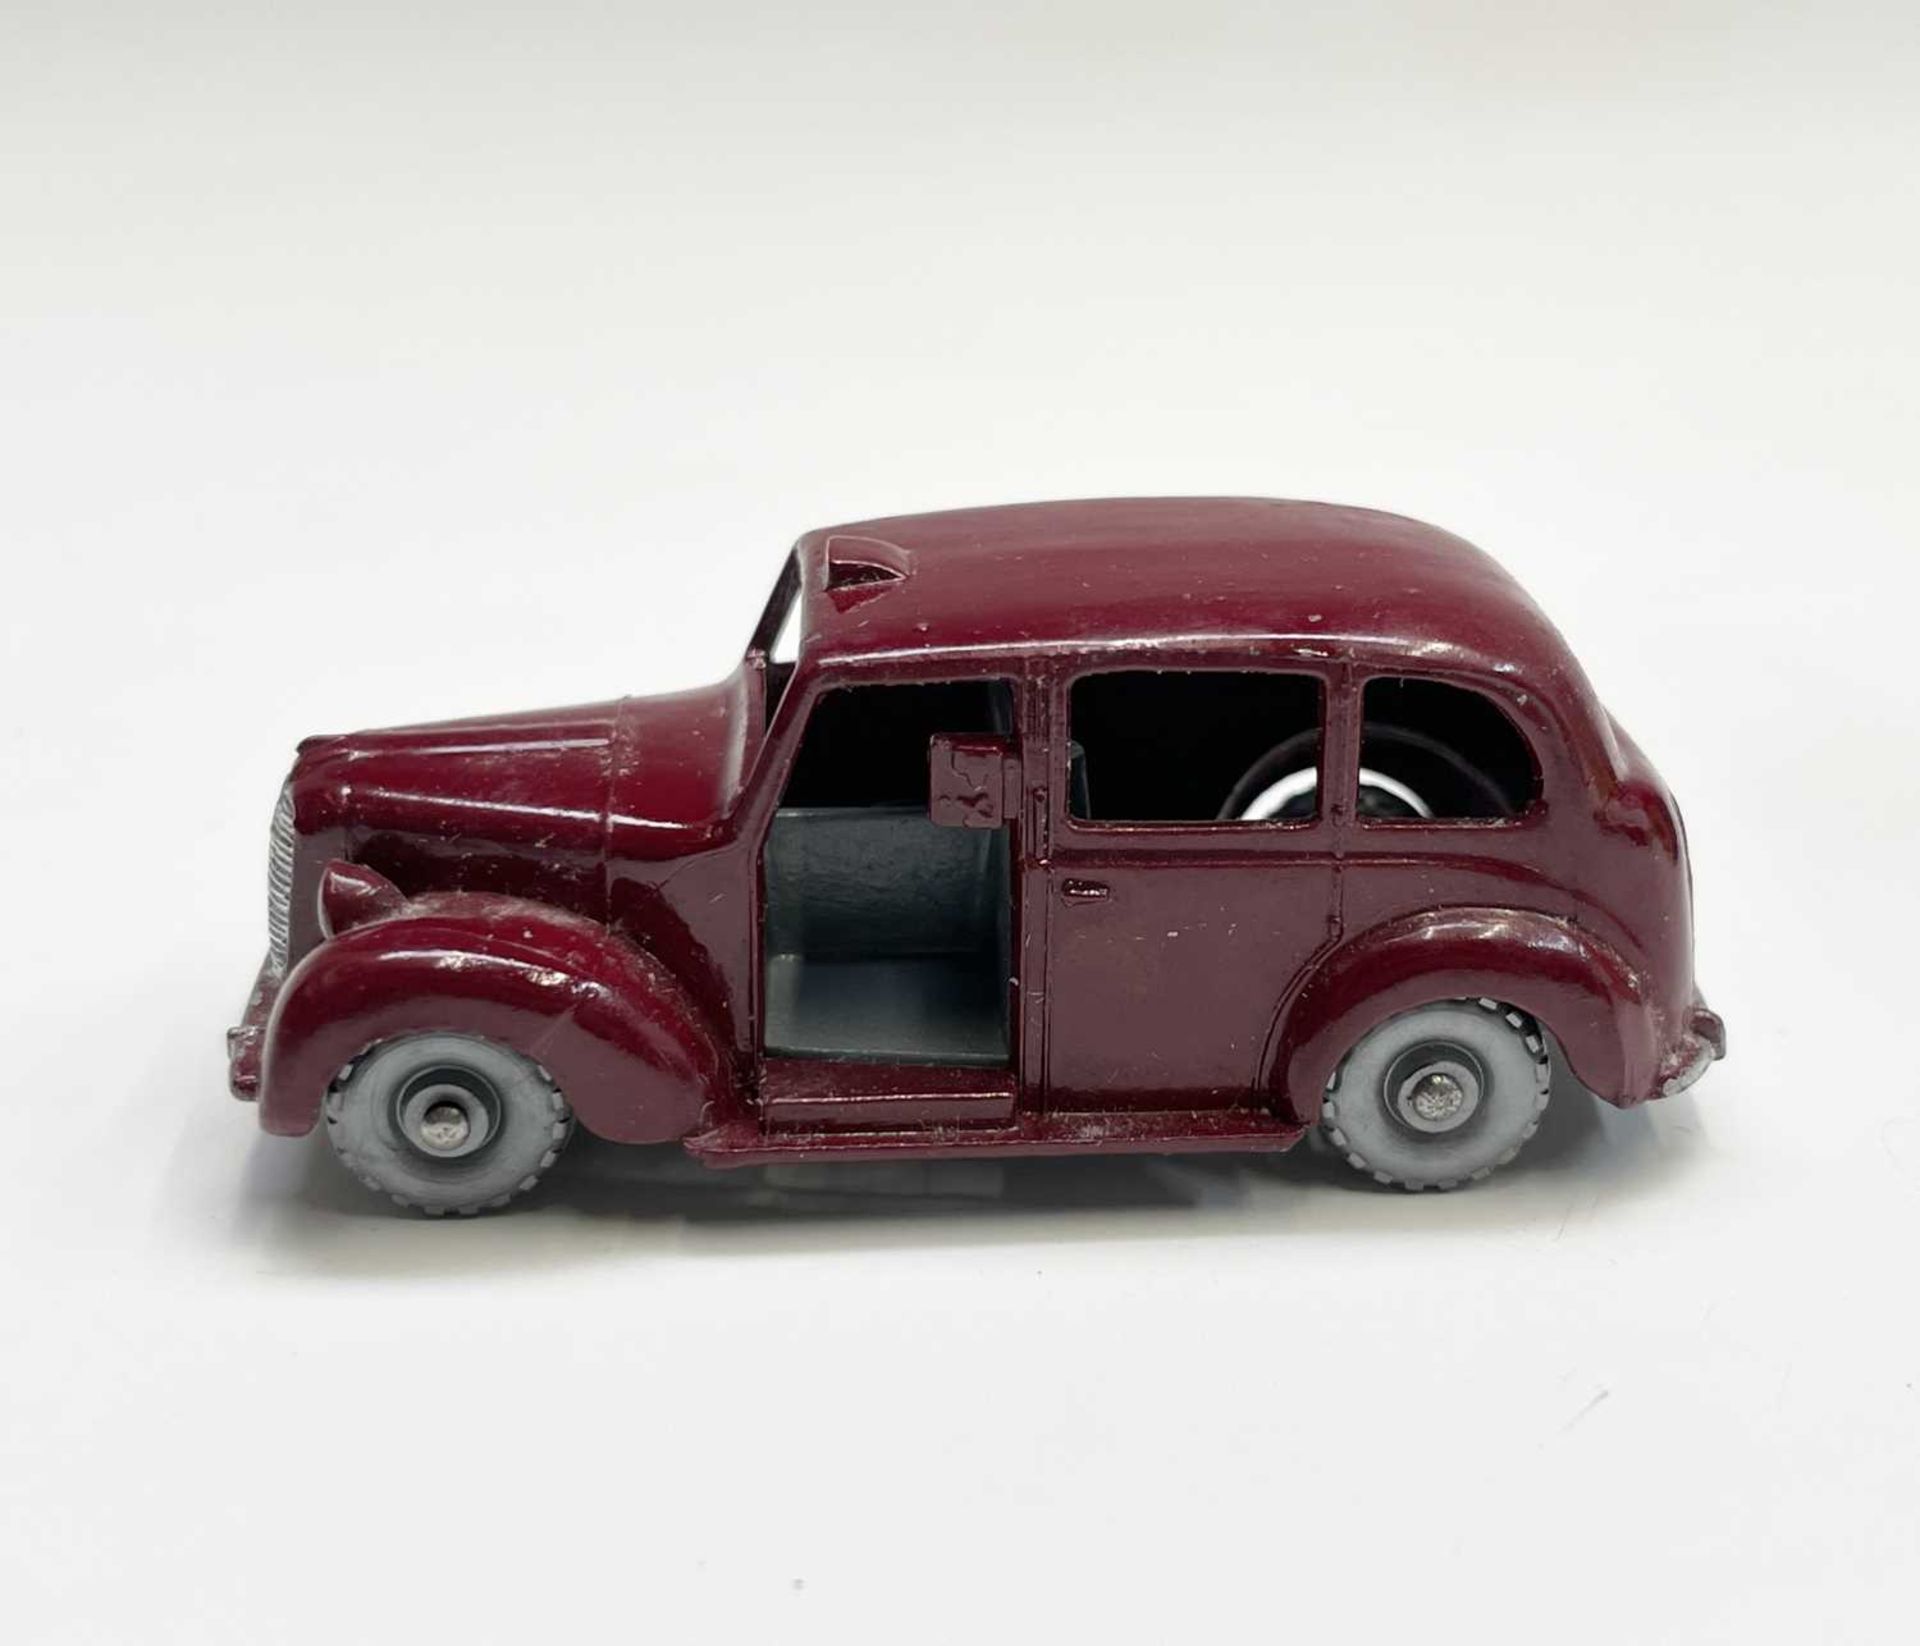 Lesney - Matchbox Toys nos 17 and 66. Austin FX3 Taxi, maroon body, mid grey interior, S.P.W. but - Image 2 of 6